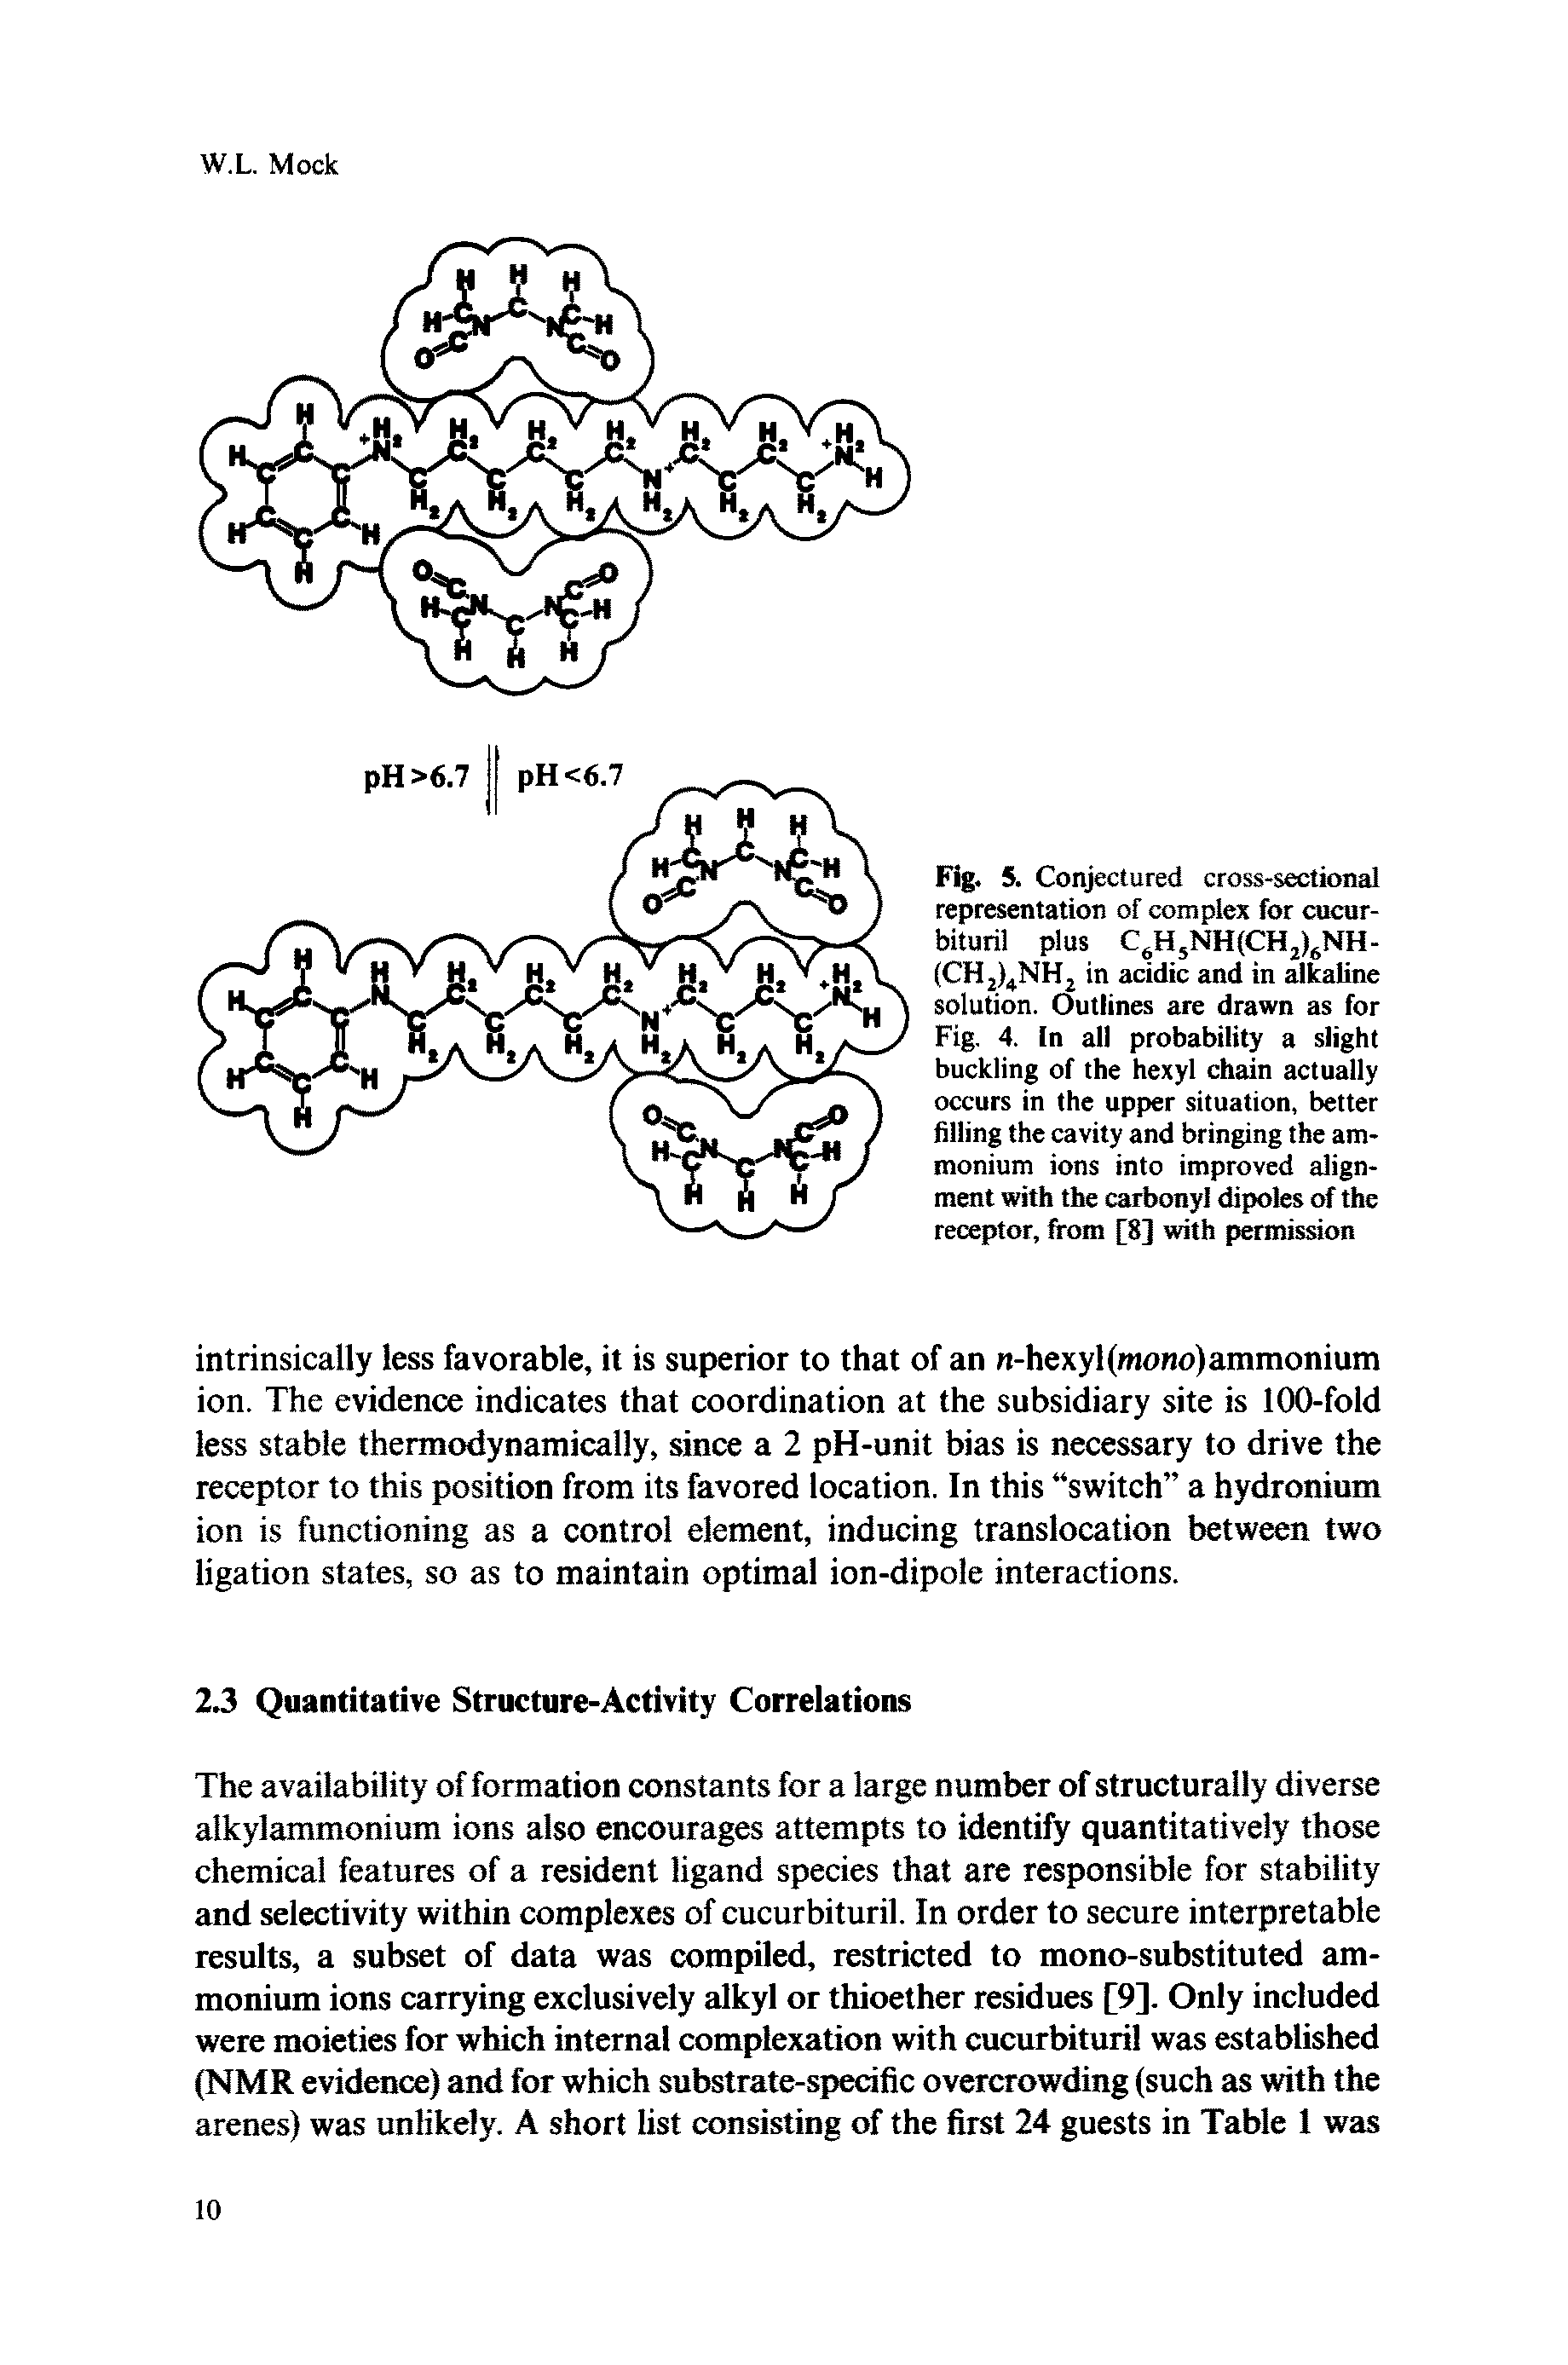 Fig. 5. Conjectured cross-sectional representation of complex for cucur-bituril plus C HjNHfCHjj NH-(CHjj NHj in acidic and in alkaline solution. Outlines are drawn as for Fig, 4. In all probability a slight buckling of the hexyl chain actually occurs in the upper situation, better filling the cavity and bringing the ammonium ions into improved alignment with the carbonyl dipoles of the receptor, from [8] with permission...